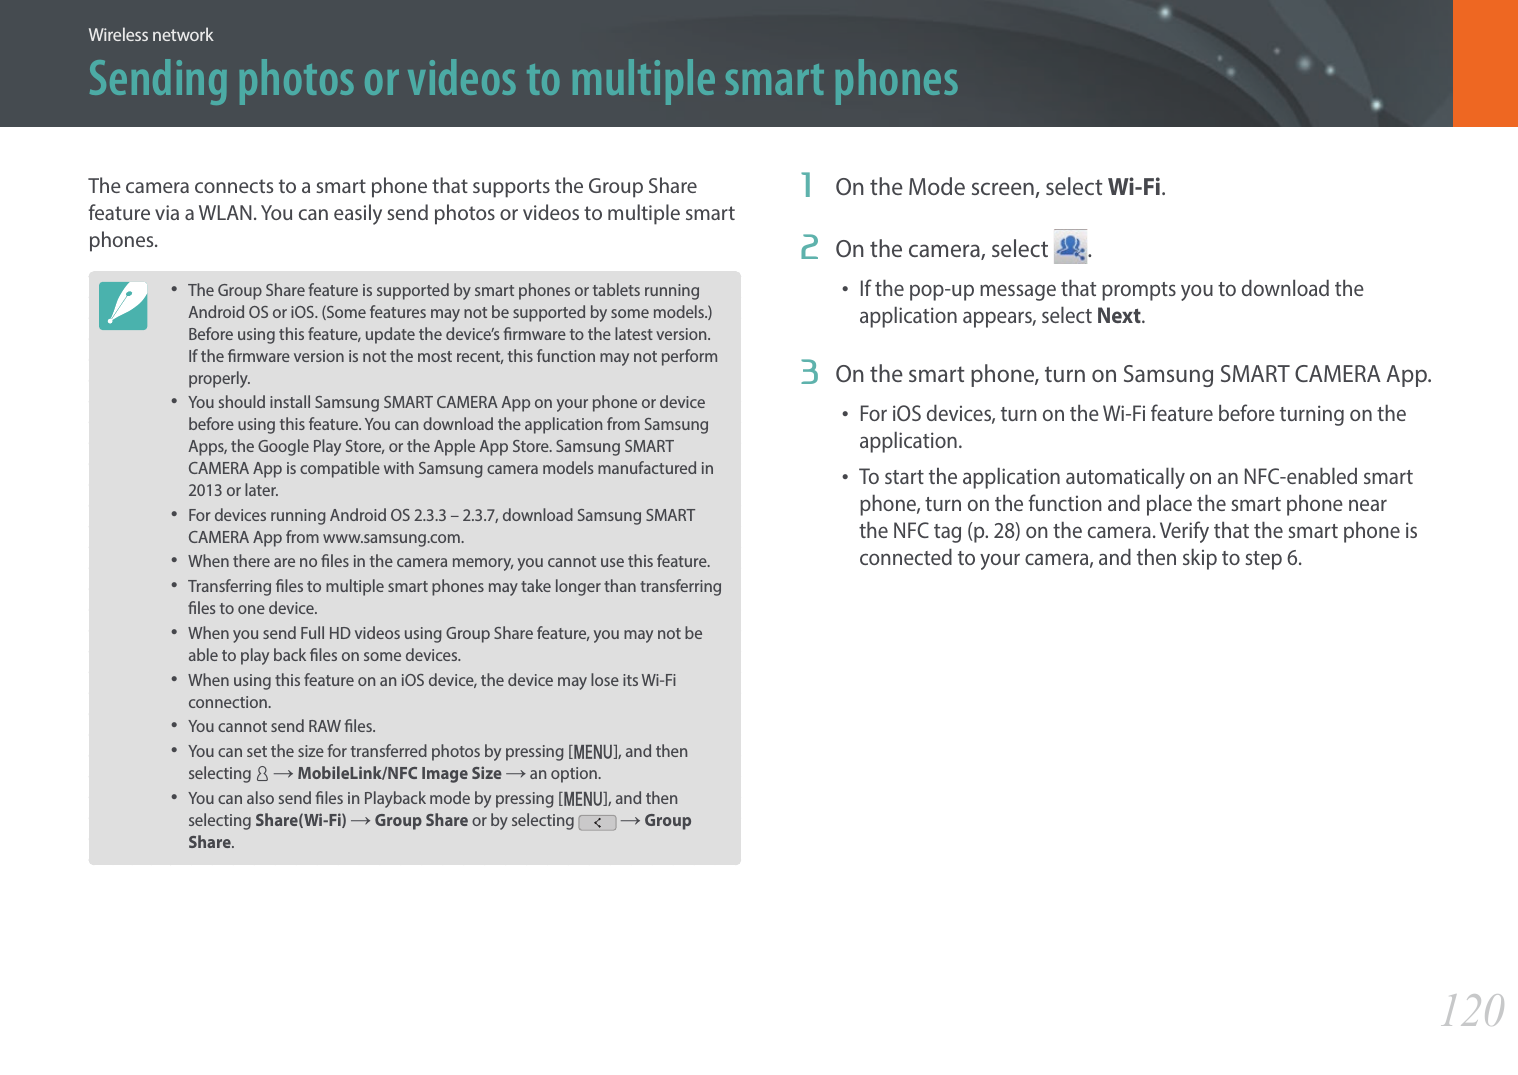 120Wireless networkSending photos or videos to multiple smart phonesThe camera connects to a smart phone that supports the Group Share feature via a WLAN. You can easily send photos or videos to multiple smart phones.• The Group Share feature is supported by smart phones or tablets running Android OS or iOS. (Some features may not be supported by some models.) Before using this feature, update the device’s rmware to the latest version. If the rmware version is not the most recent, this function may not perform properly. • You should install Samsung SMART CAMERA App on your phone or device before using this feature. You can download the application from Samsung Apps, the Google Play Store, or the Apple App Store. Samsung SMART CAMERA App is compatible with Samsung camera models manufactured in 2013 or later. • For devices running Android OS 2.3.3 – 2.3.7, download Samsung SMART CAMERA App from www.samsung.com.• When there are no les in the camera memory, you cannot use this feature.• Transferring les to multiple smart phones may take longer than transferring les to one device. • When you send Full HD videos using Group Share feature, you may not be able to play back les on some devices.• When using this feature on an iOS device, the device may lose its Wi-Fi connection.• You cannot send RAW les. • You can set the size for transferred photos by pressing [m], and then selecting d ĺ MobileLink/NFC Image Size ĺ an option. • You can also send les in Playback mode by pressing [m], and then selecting Share(Wi-Fi) ĺ Group Share or by selecting   ĺ Group Share.1  On the Mode screen, select Wi-Fi.2  On the camera, select  .• If the pop-up message that prompts you to download the application appears, select Next.3  On the smart phone, turn on Samsung SMART CAMERA App.• For iOS devices, turn on the Wi-Fi feature before turning on the application.• To start the application automatically on an NFC-enabled smart phone, turn on the function and place the smart phone near the NFC tag (p. 28) on the camera. Verify that the smart phone is connected to your camera, and then skip to step 6.